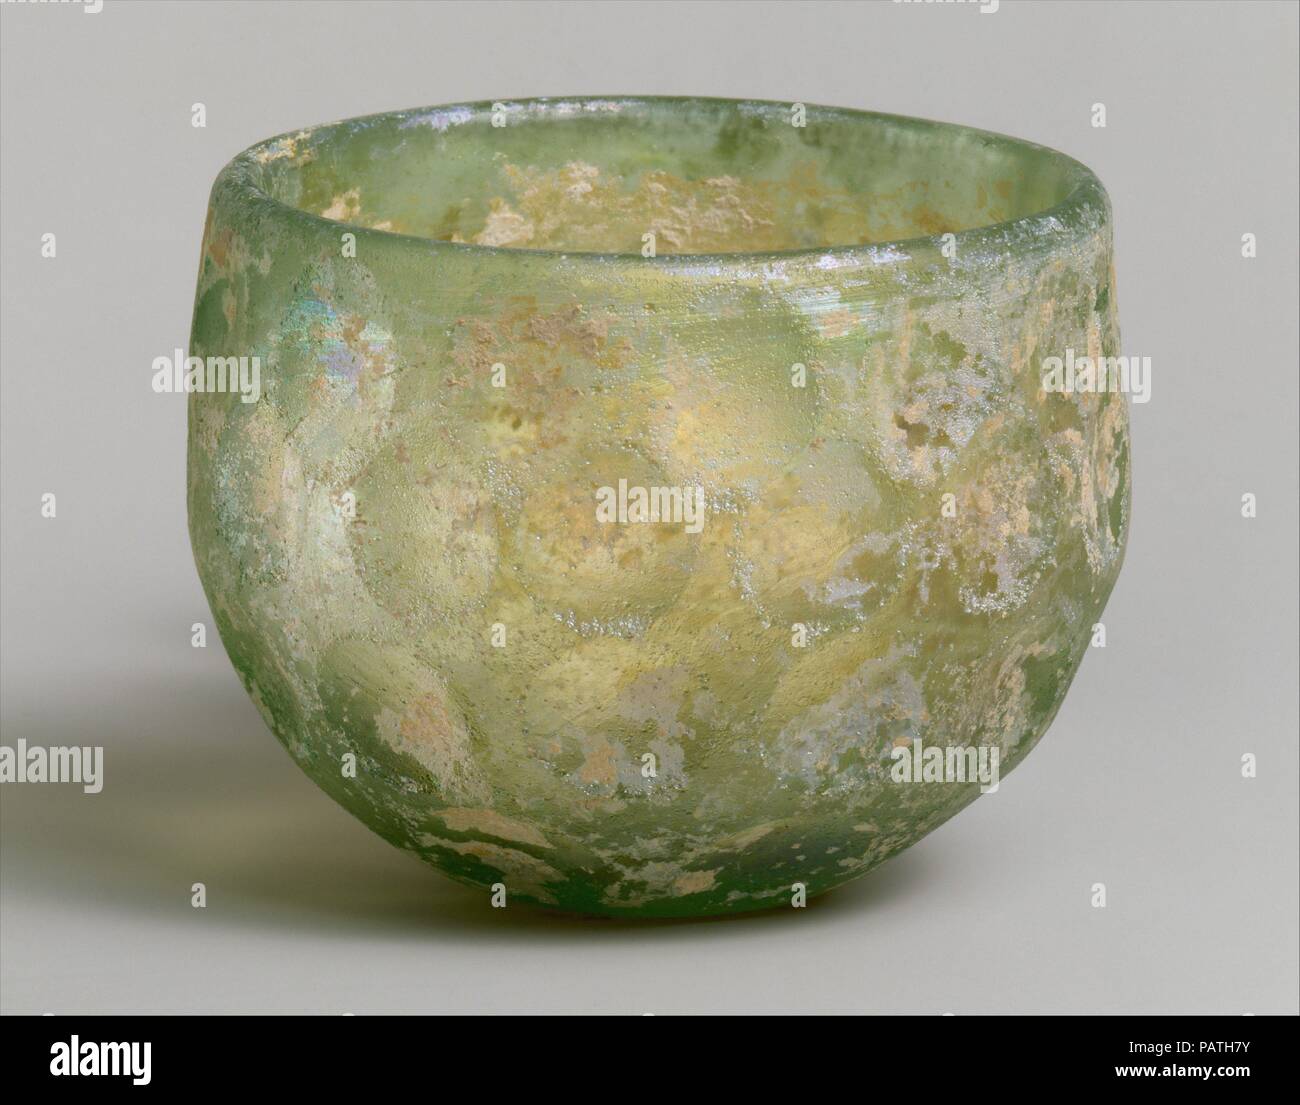 Bowl with wheel-cut facets. Culture: Sasanian. Dimensions: H. 7.9 cm. Date: ca. 6th-7th century A.D..  This hemispherical bowl may have been made by blowing molten glass into an open mold (though possibly it was free-blown); subsequently, four rows of oblong-to-round facets were wheel-cut and polished. The thick glass, originally pale green, has lost much of its surface color and gained extensive iridescence through weathering.  Faceted bowls such as this one are characterized by uniformity of shape, size, and arrangement of the facets in four or five rows. They represent the most widespread t Stock Photo